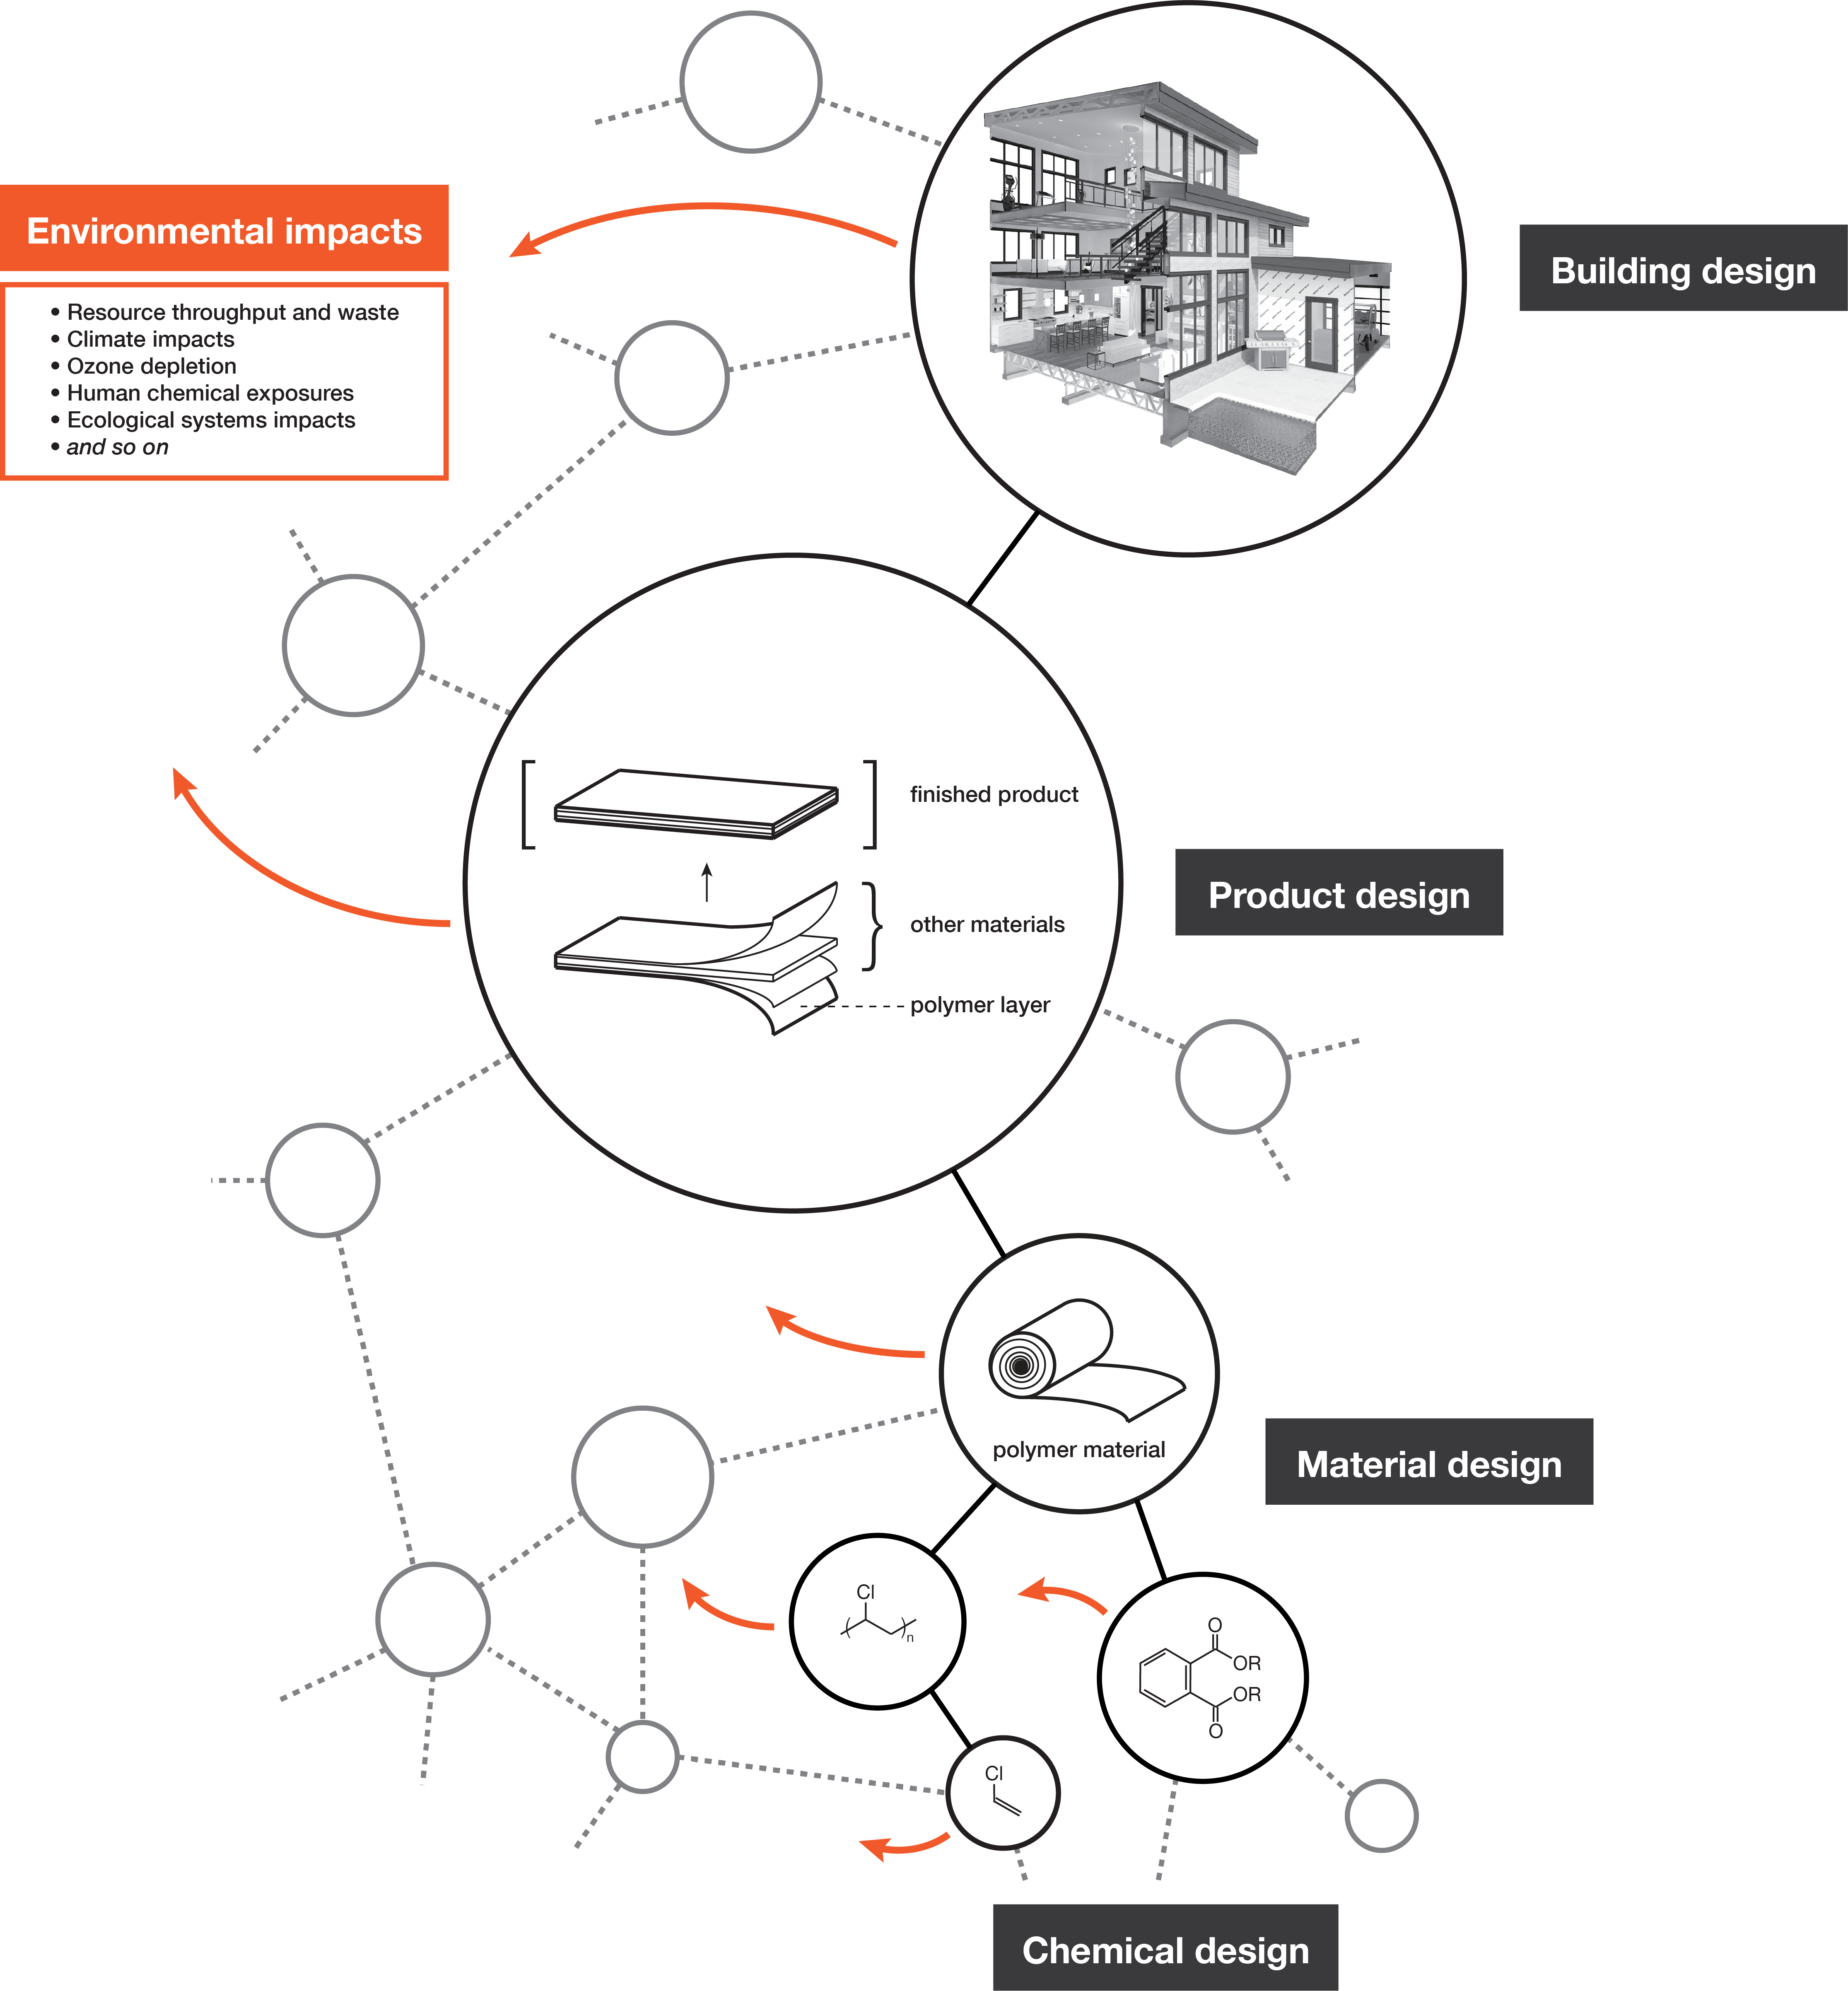 Diagram showing a network of links between chemical design, material design, product design, and building design